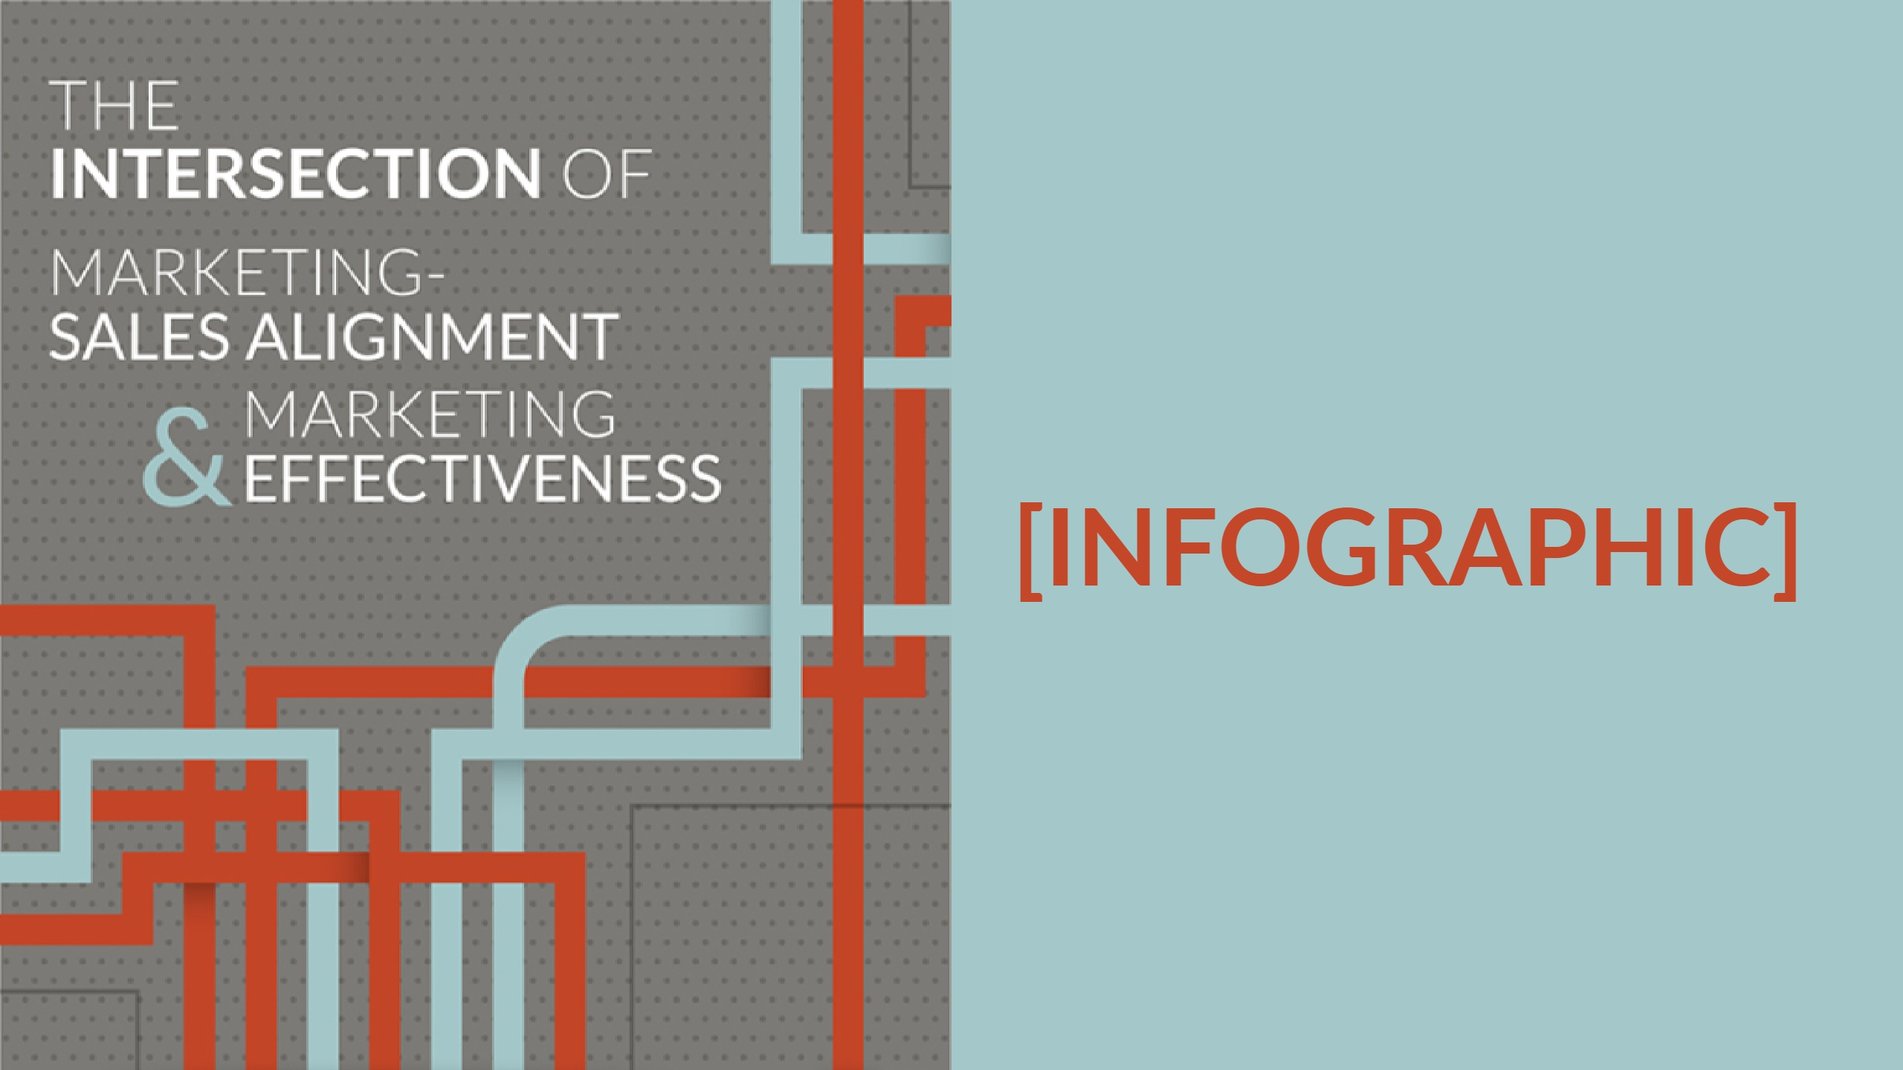 Where Departmental Alignment & Marketing Effectiveness Intersect (infographic)